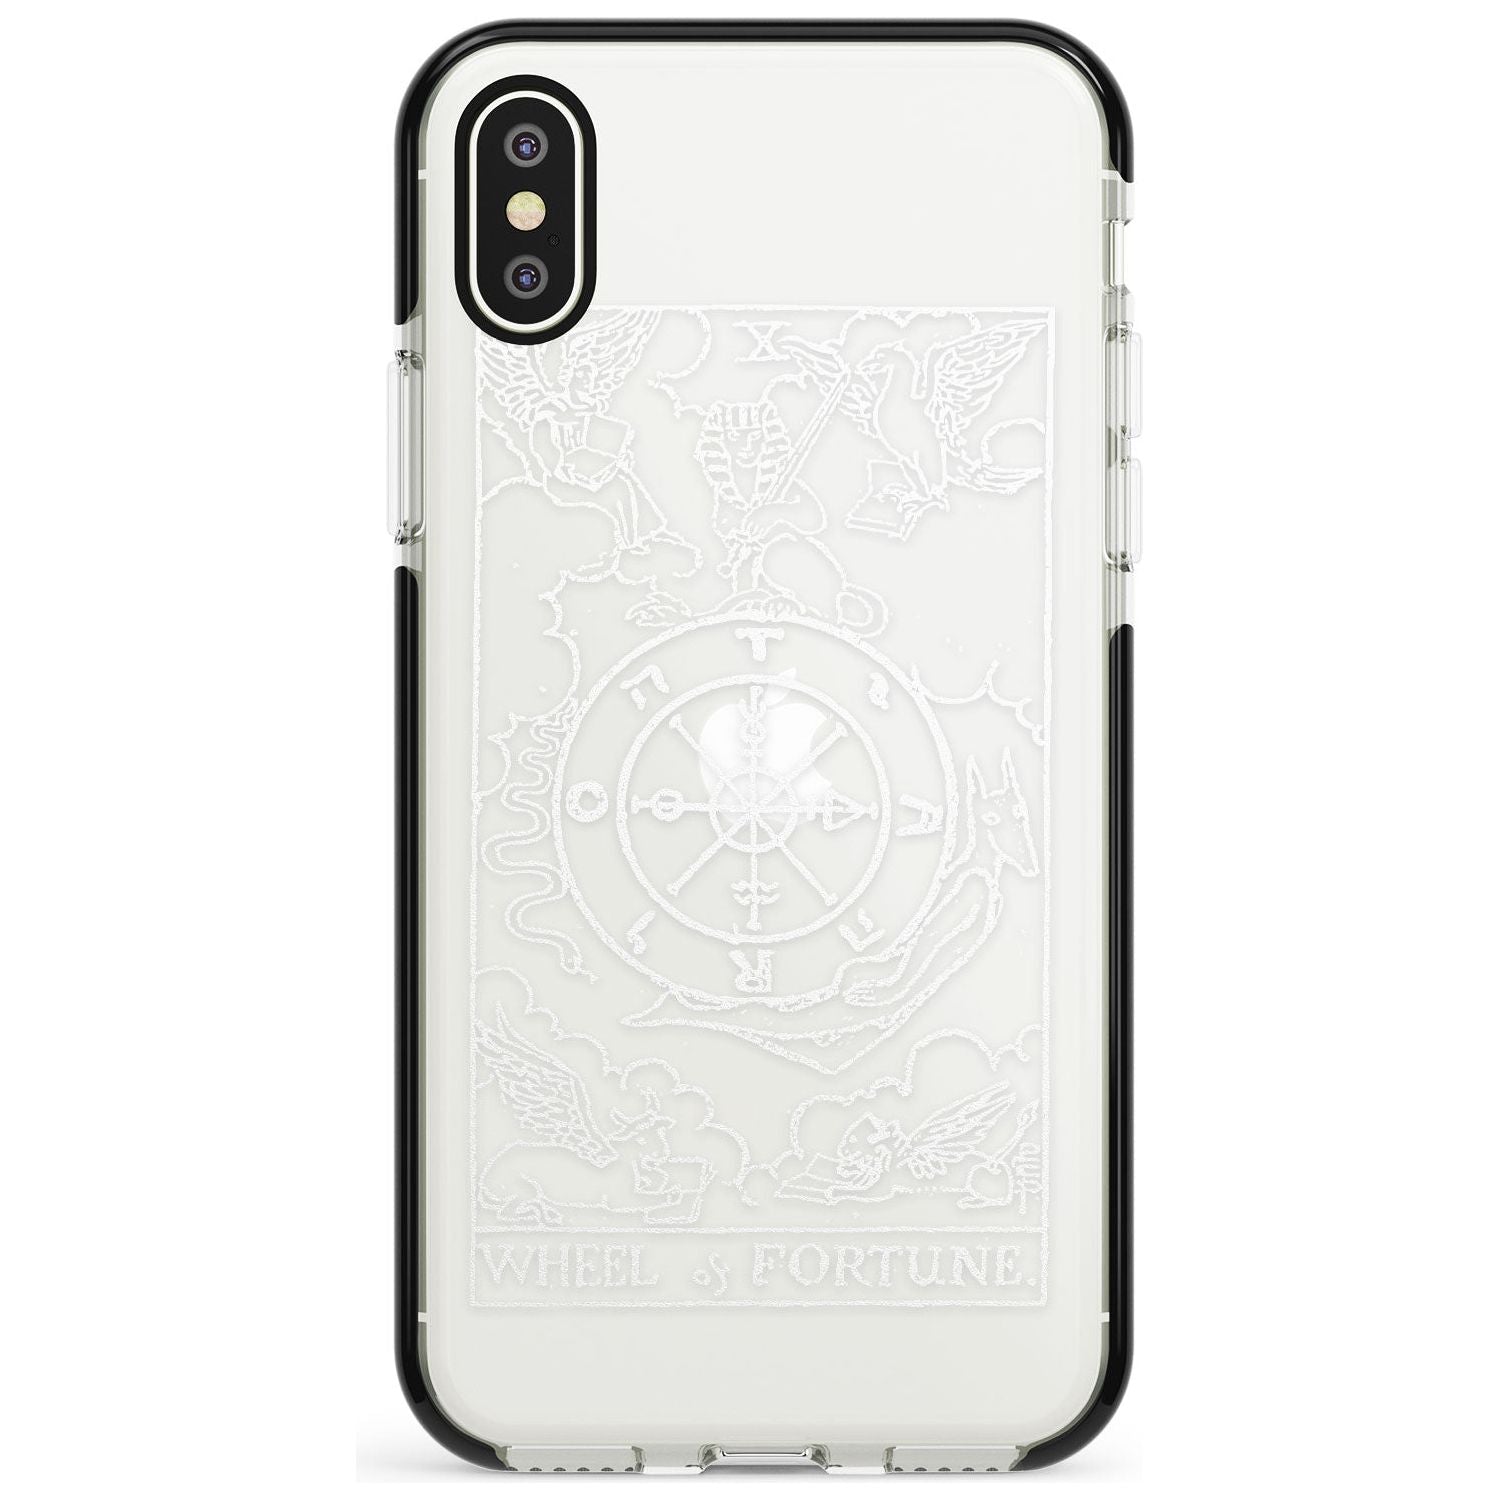 Wheel of Fortune Tarot Card - White Transparent Pink Fade Impact Phone Case for iPhone X XS Max XR